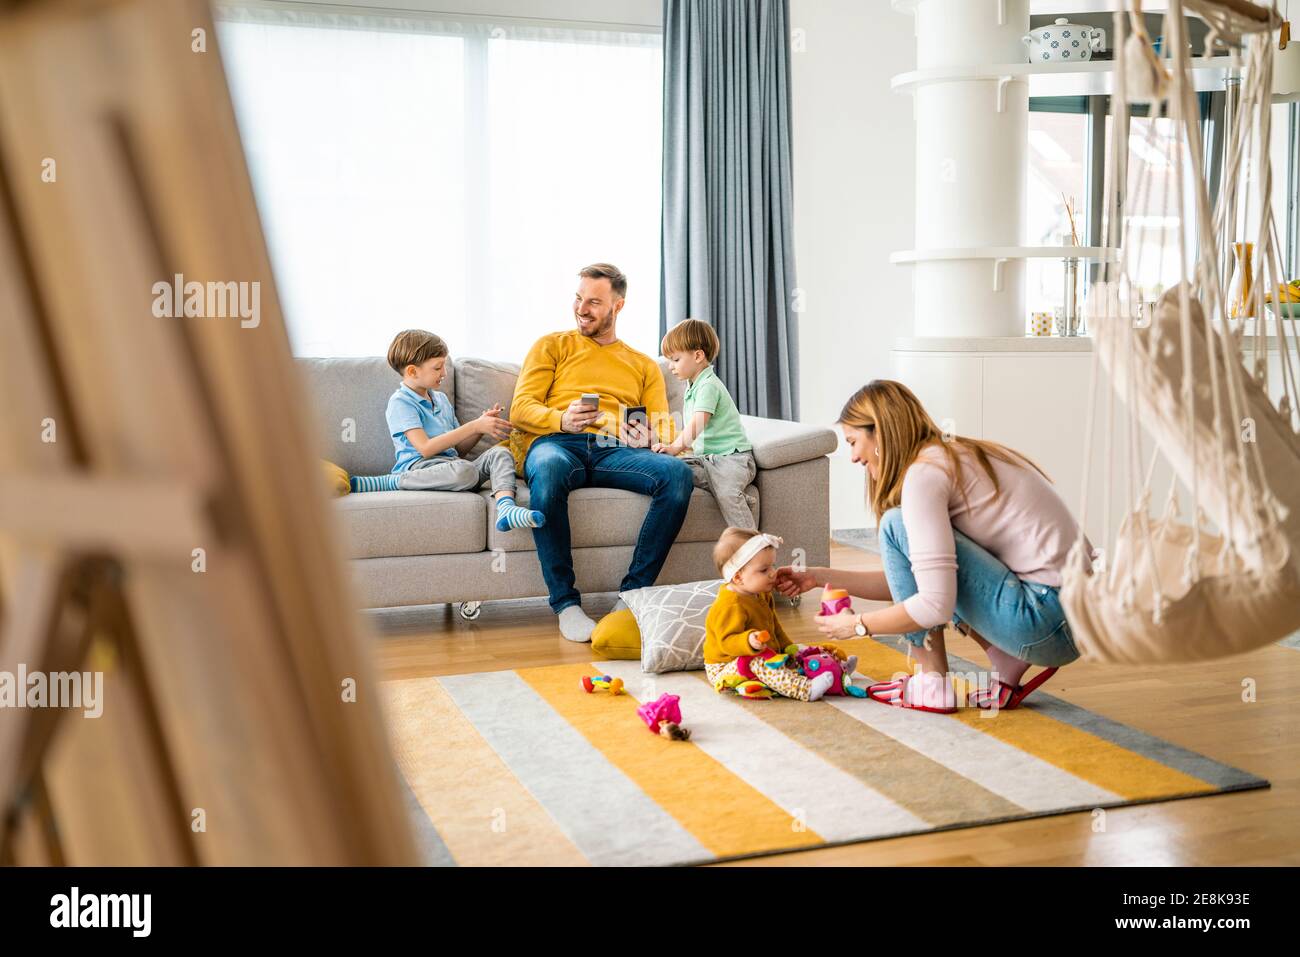 Happy young family spending time together at home Stock Photo